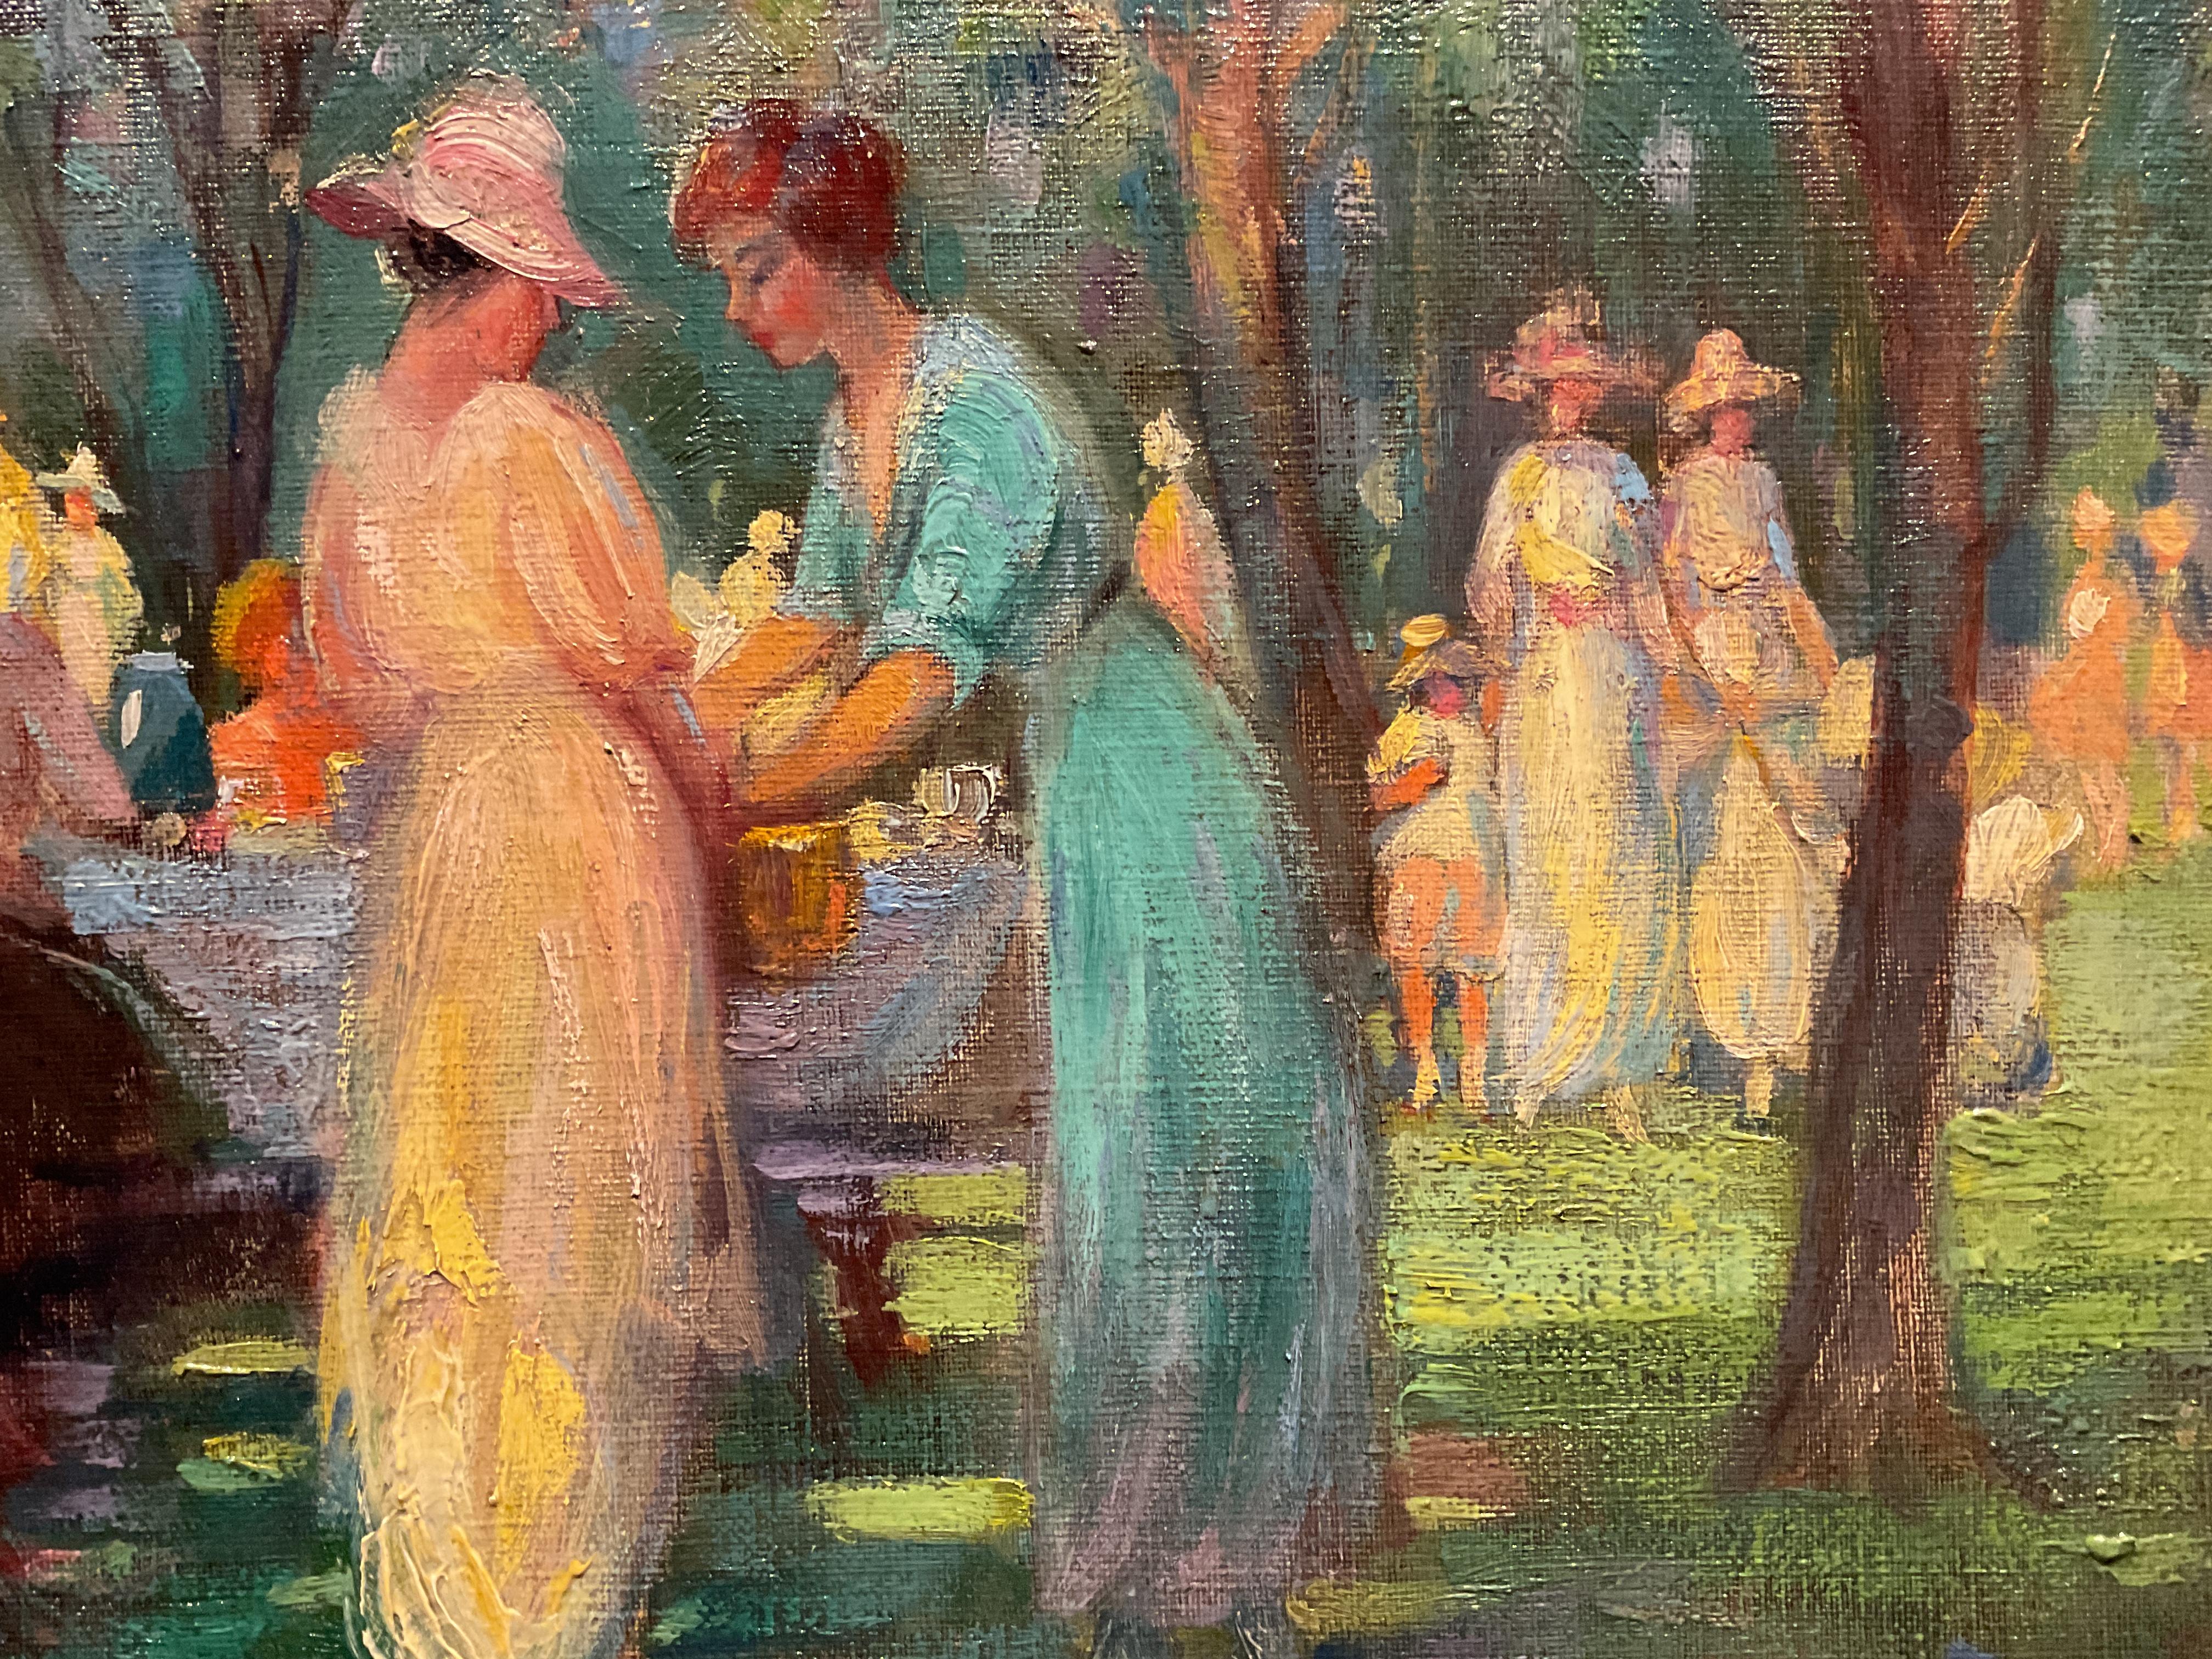 This lovely impressionist painting portrays what appears to be a family outing or picnic.  There are many beautifully dressed women with their children in a park setting.  Oddly, what appears to be missing are men, or their husbands.  Perhaps it’s a